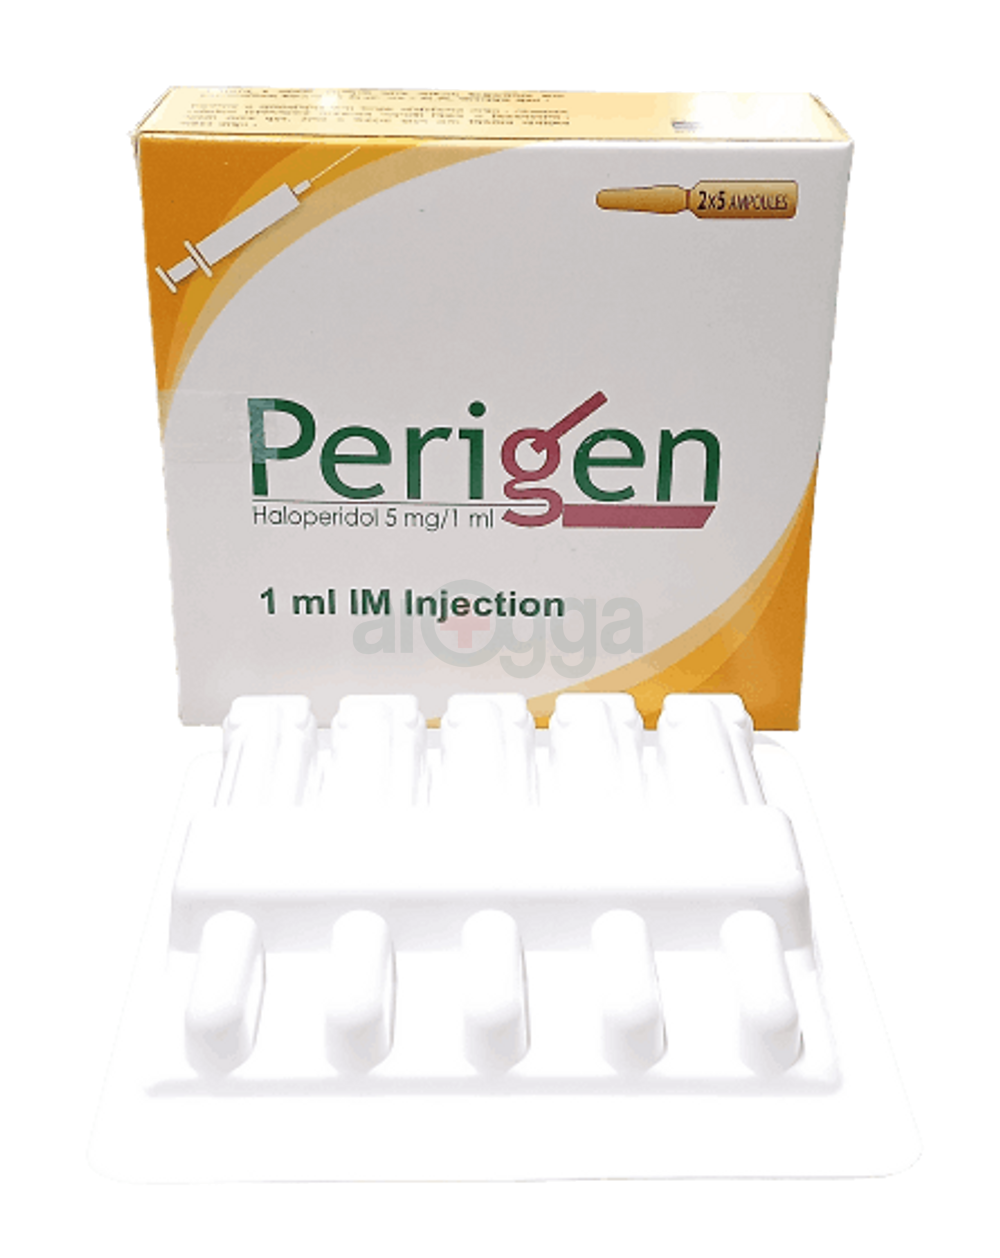 Serenace Injection 1ml: View Uses, Side Effects, Price and